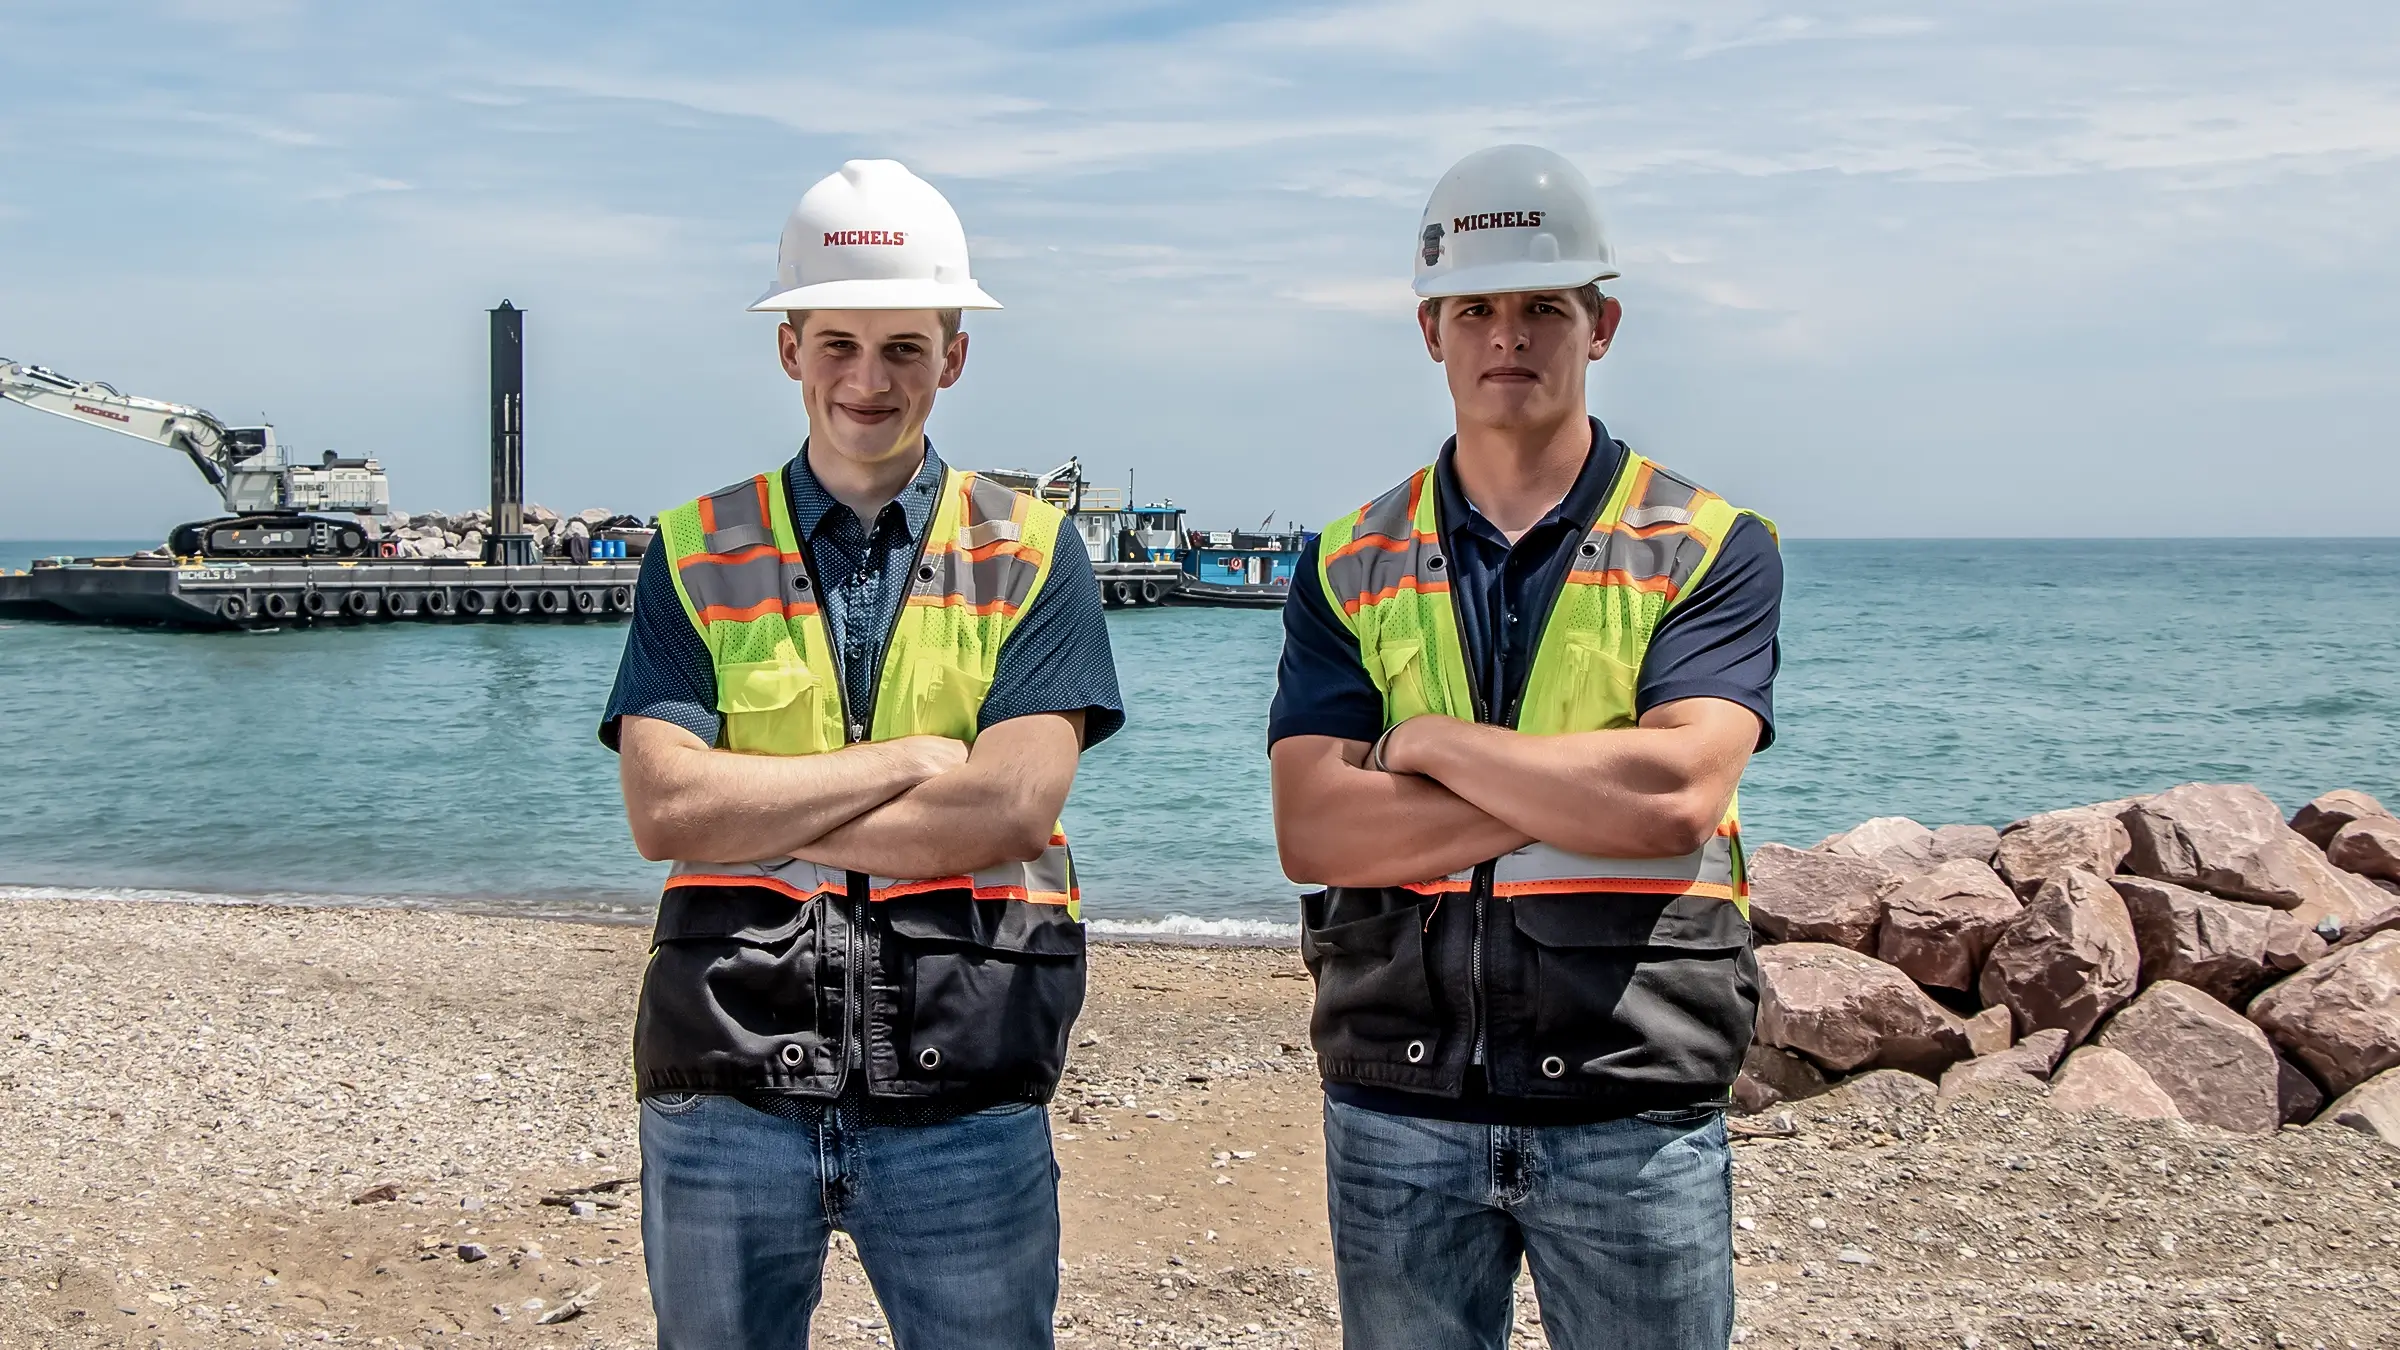 Two interns wearing PPE stand near a marine jobsite.